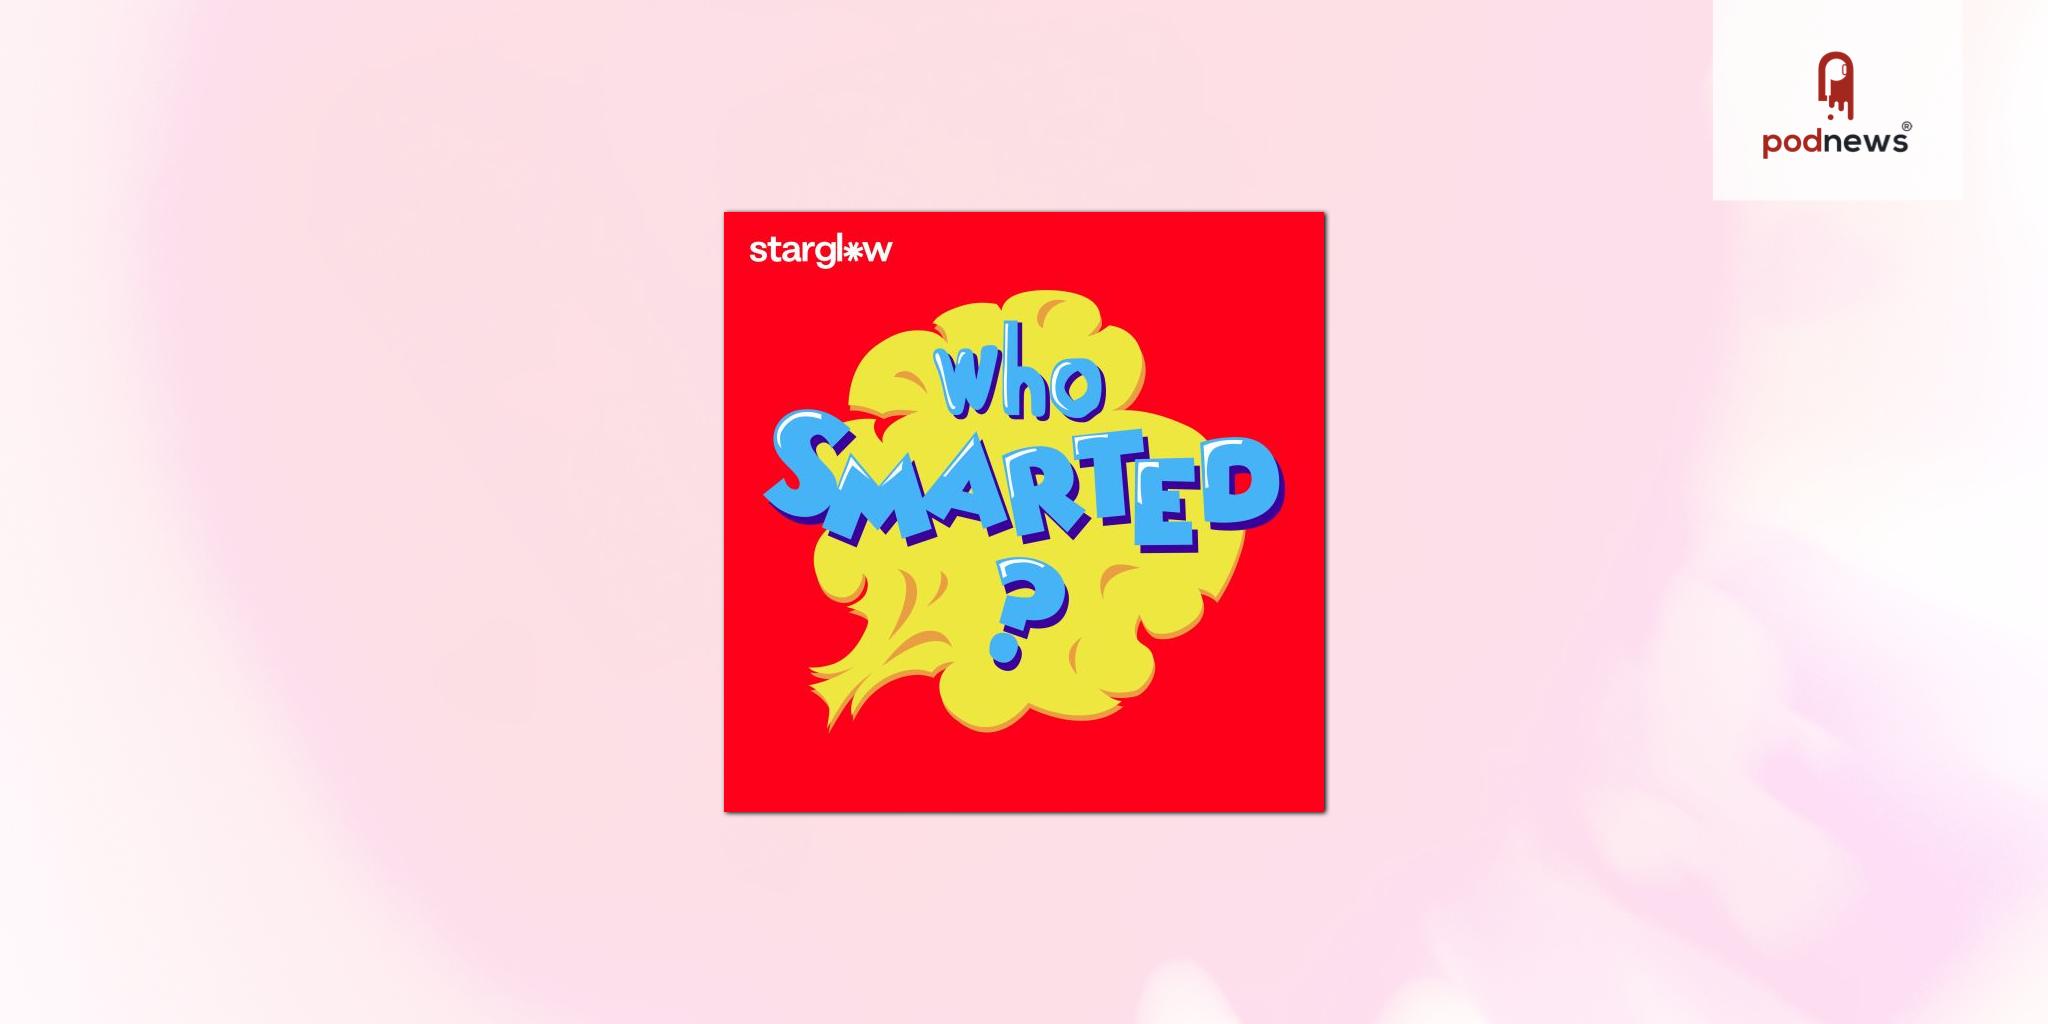 Atomic Entertainment Announces Increased Cadence for “Who Smarted?”